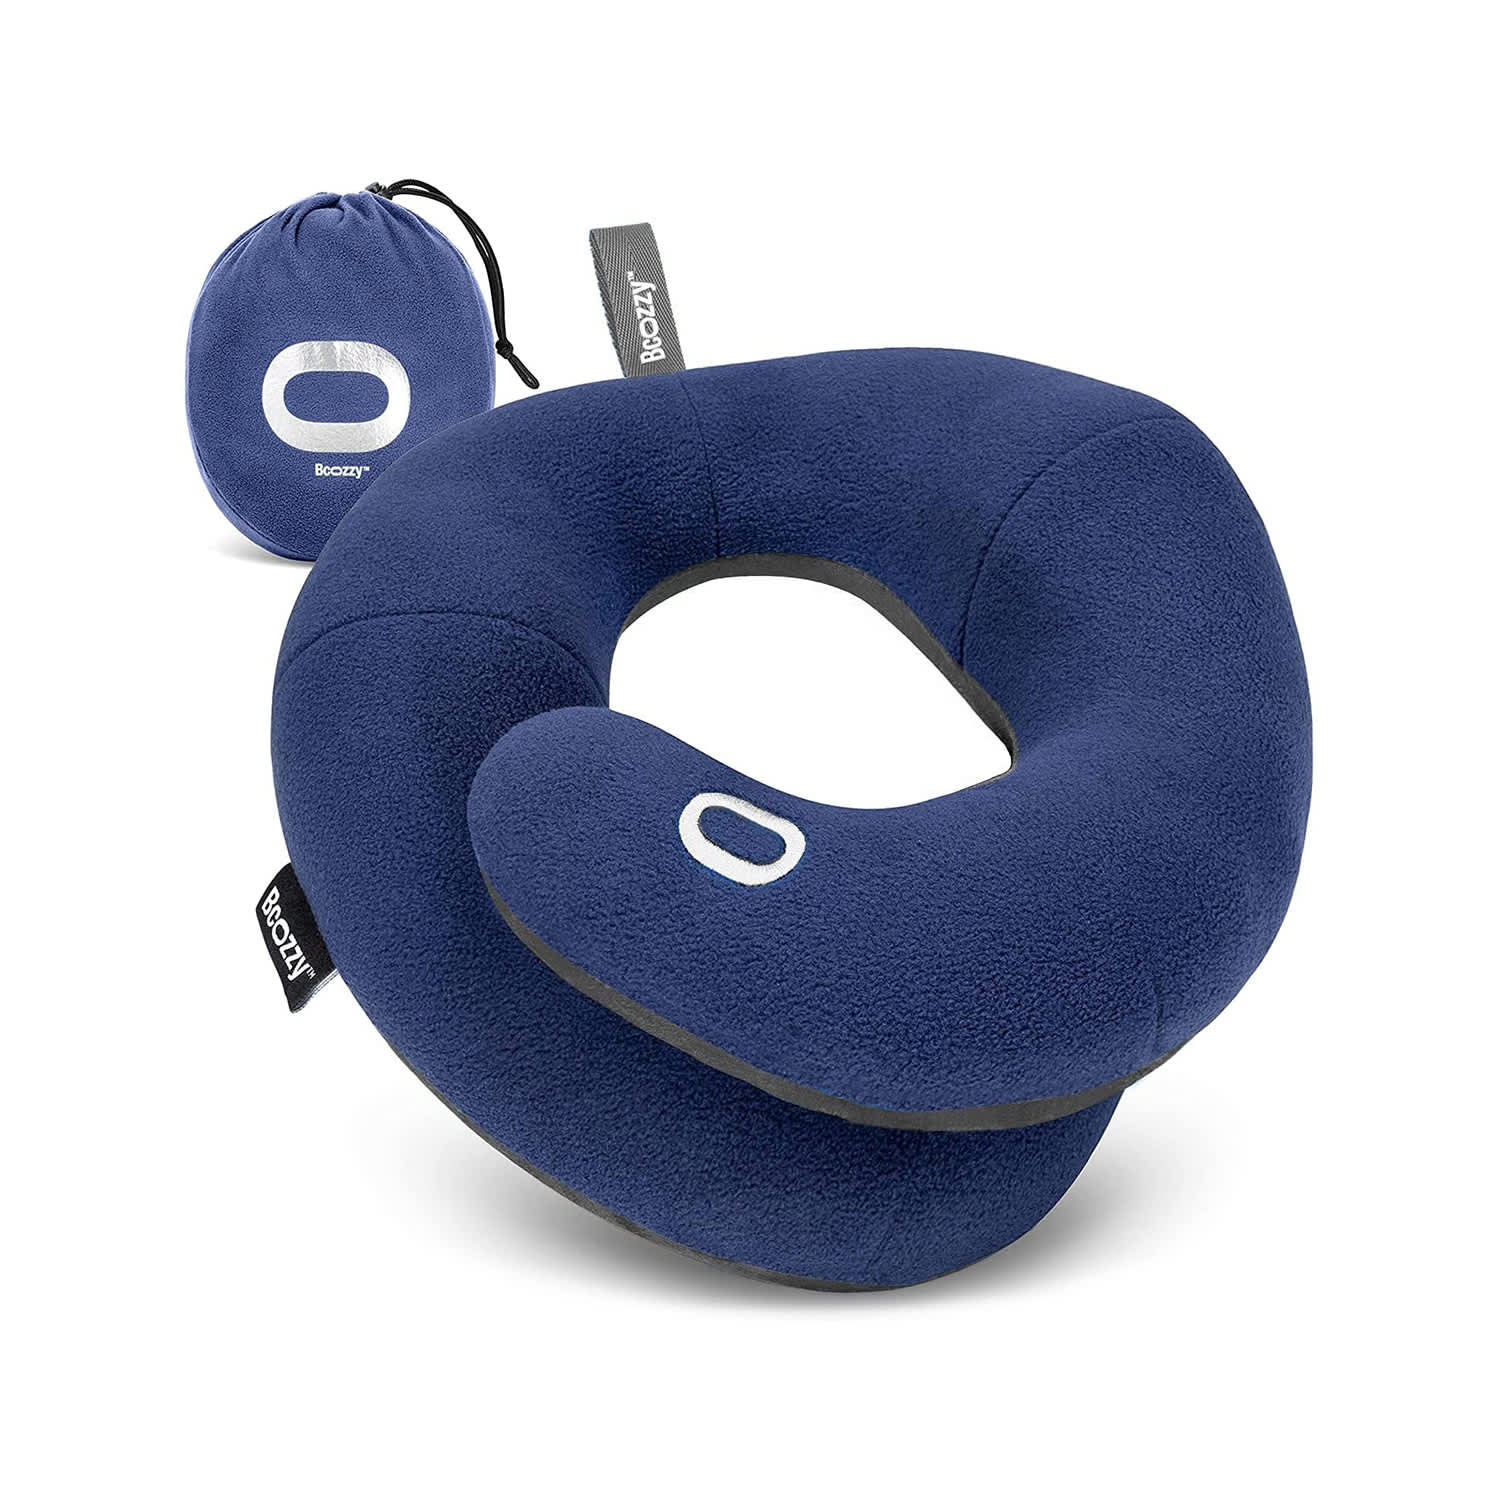 http://cdn.apartmenttherapy.info/image/upload/v1691783514/commerce/product-roundups/2023/2023-08-best-travel-pillows/bcozzy-neck-pillow.jpg